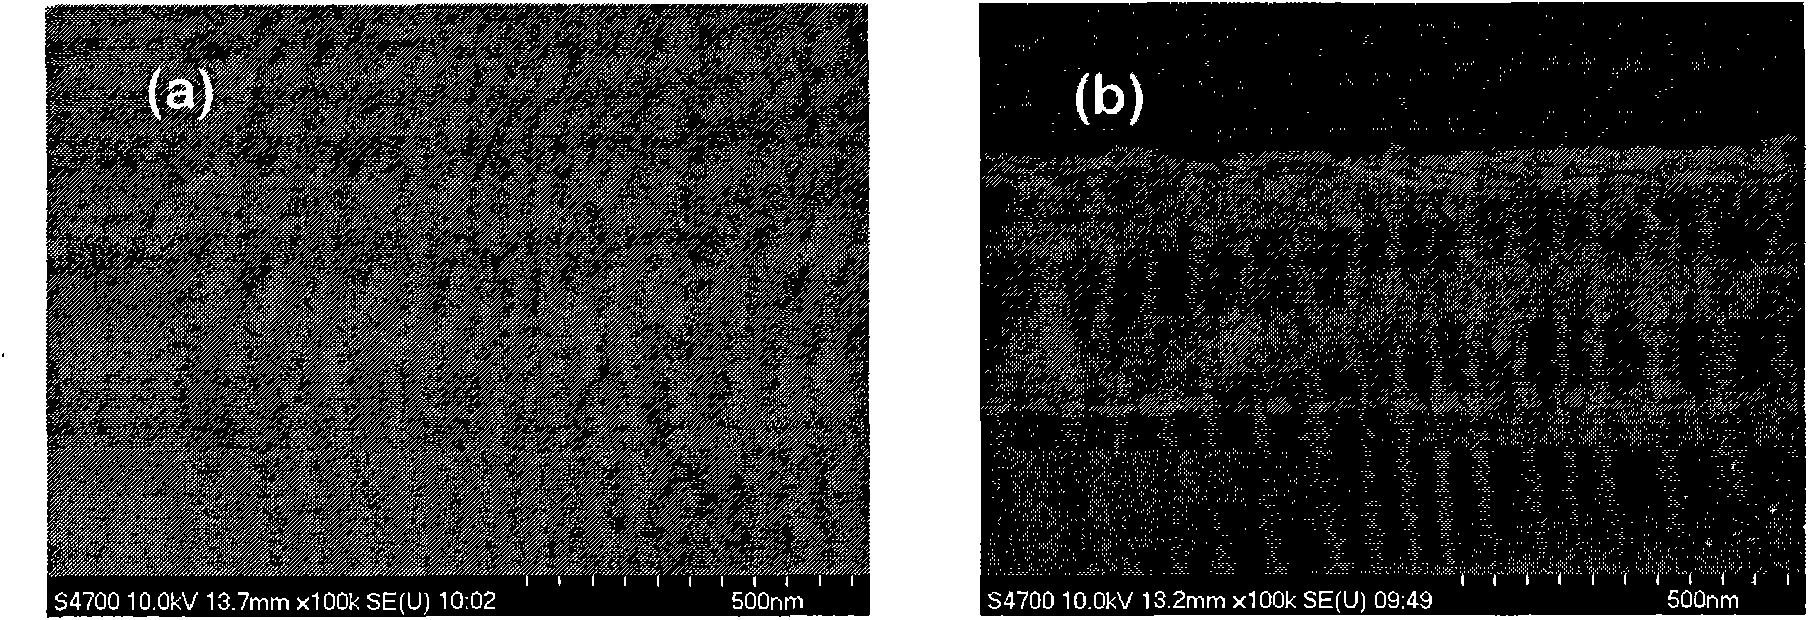 Method for preparing lead-titanate-lead-magnesium niobate films by pulsed laser deposition assisted by oxygen plasmas